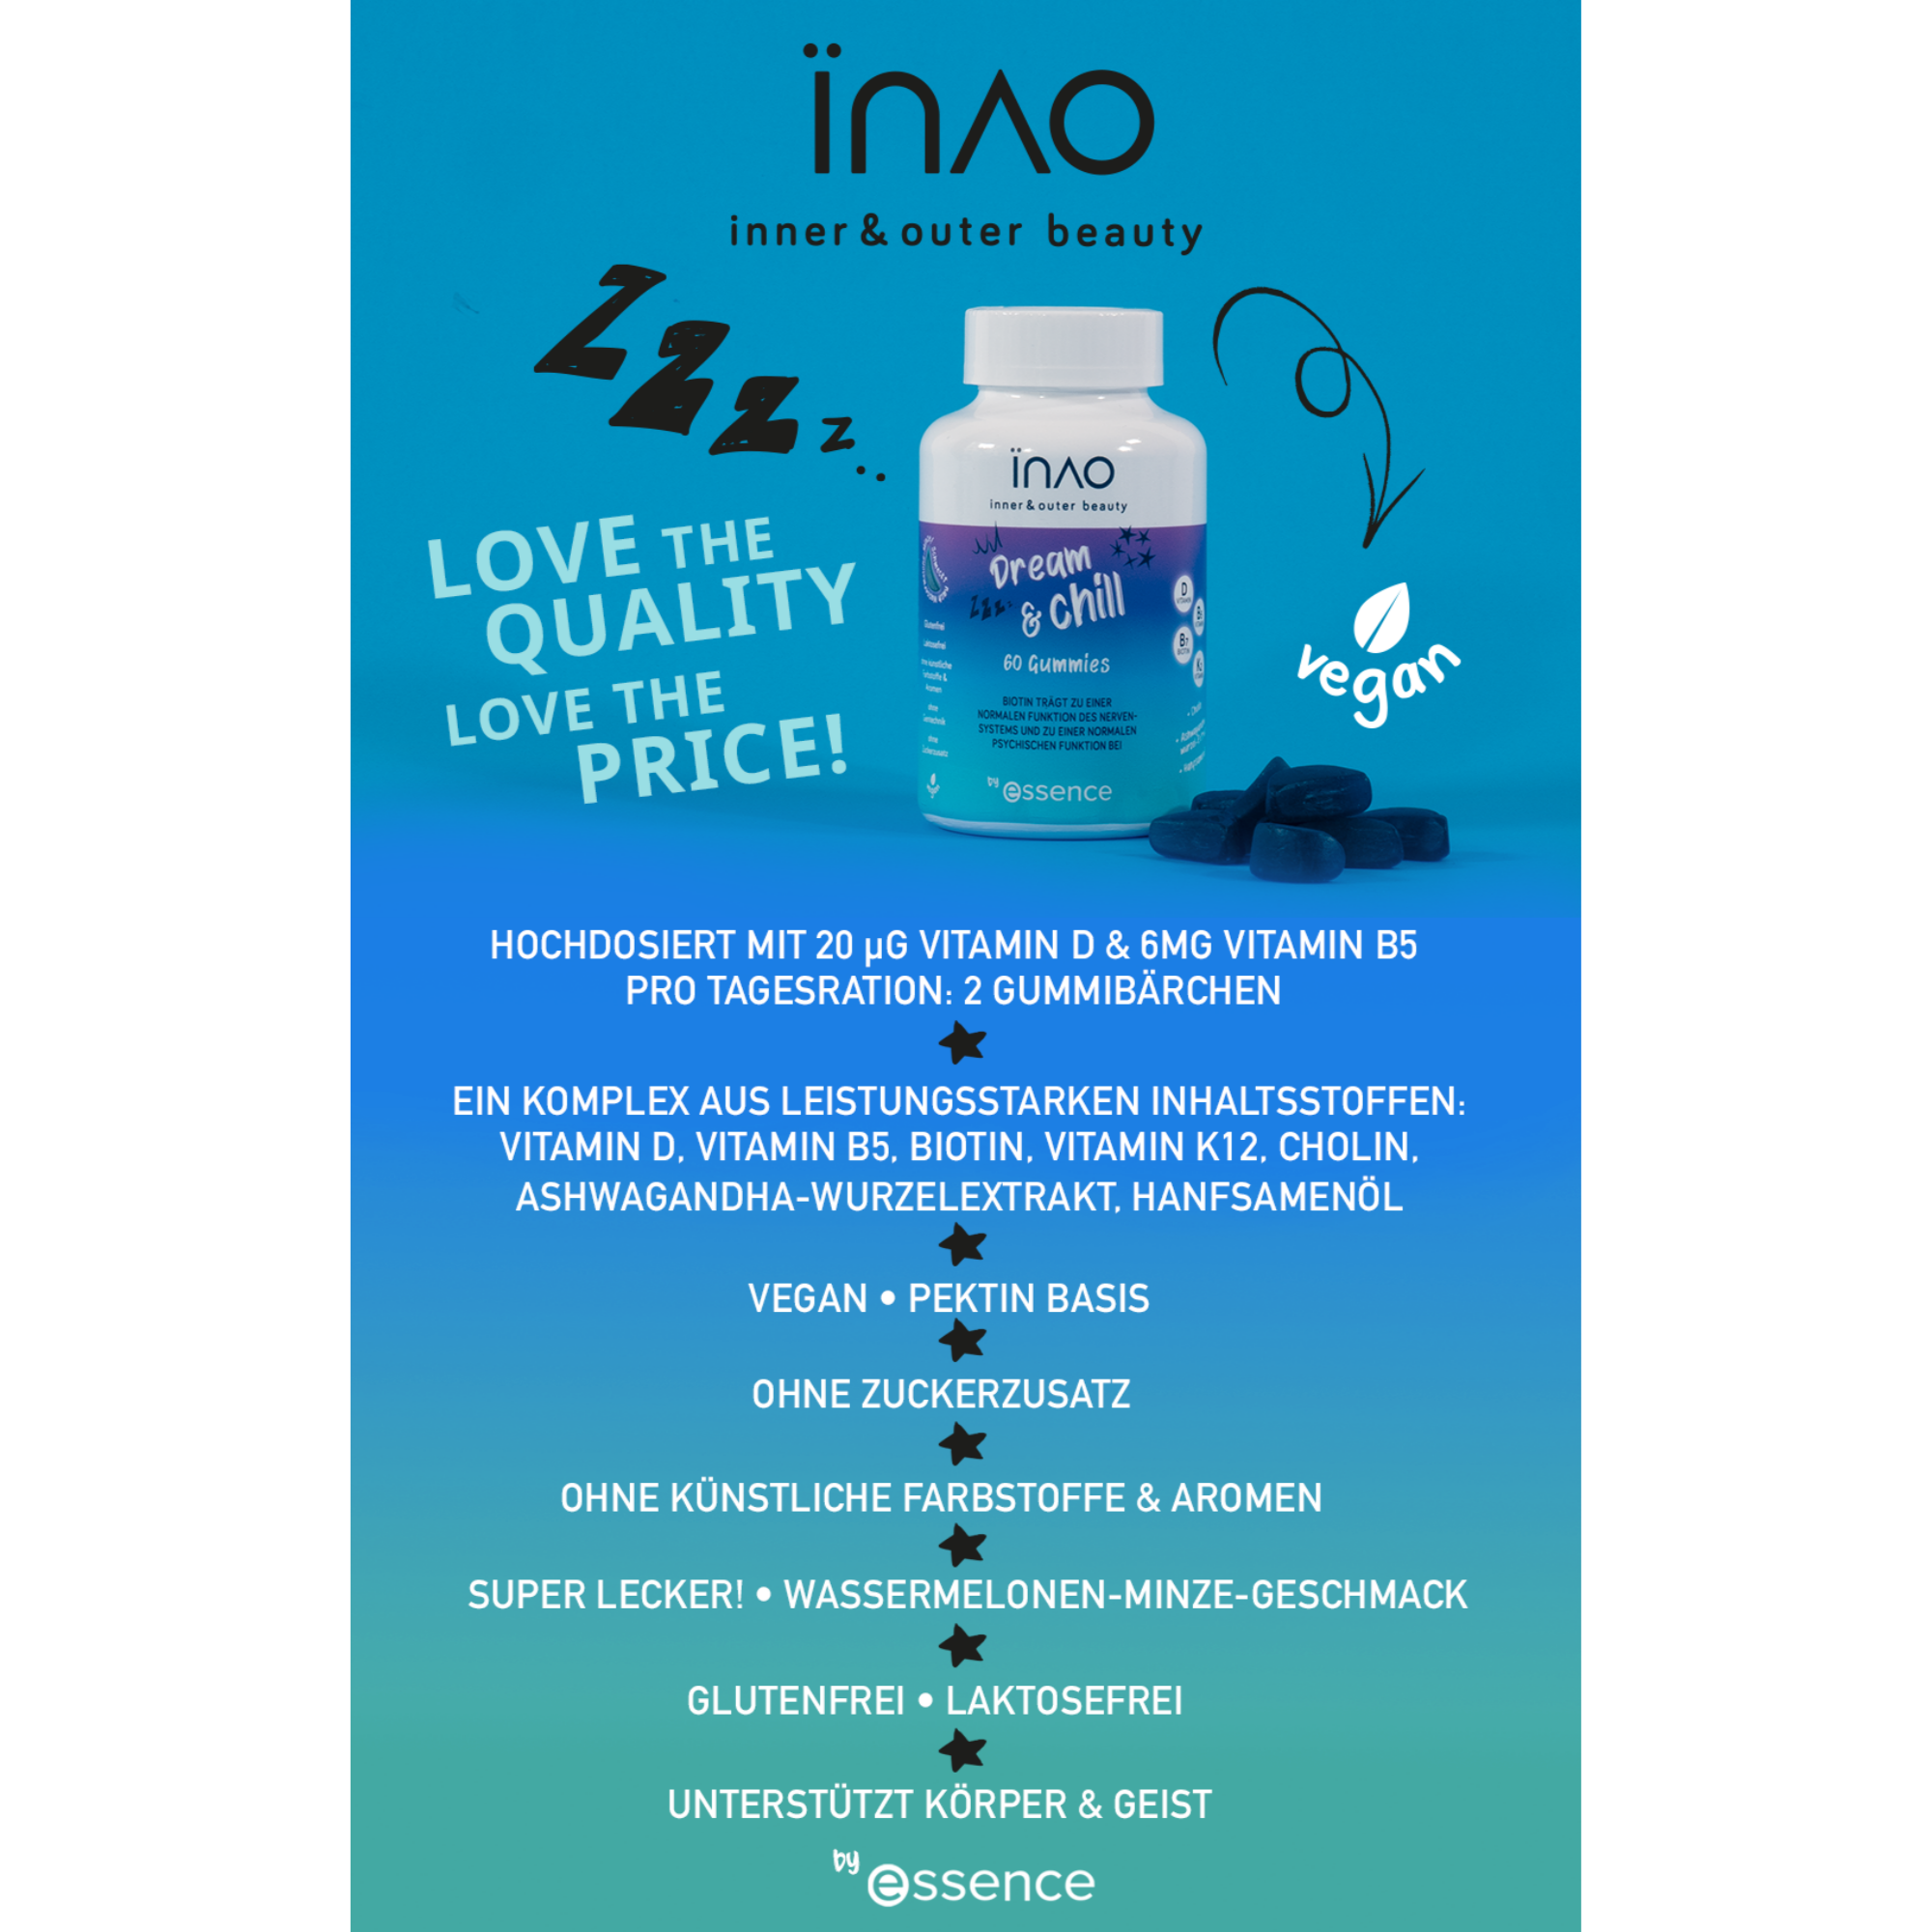 INAO inner and outer beauty Dream and Chill gummies by essence